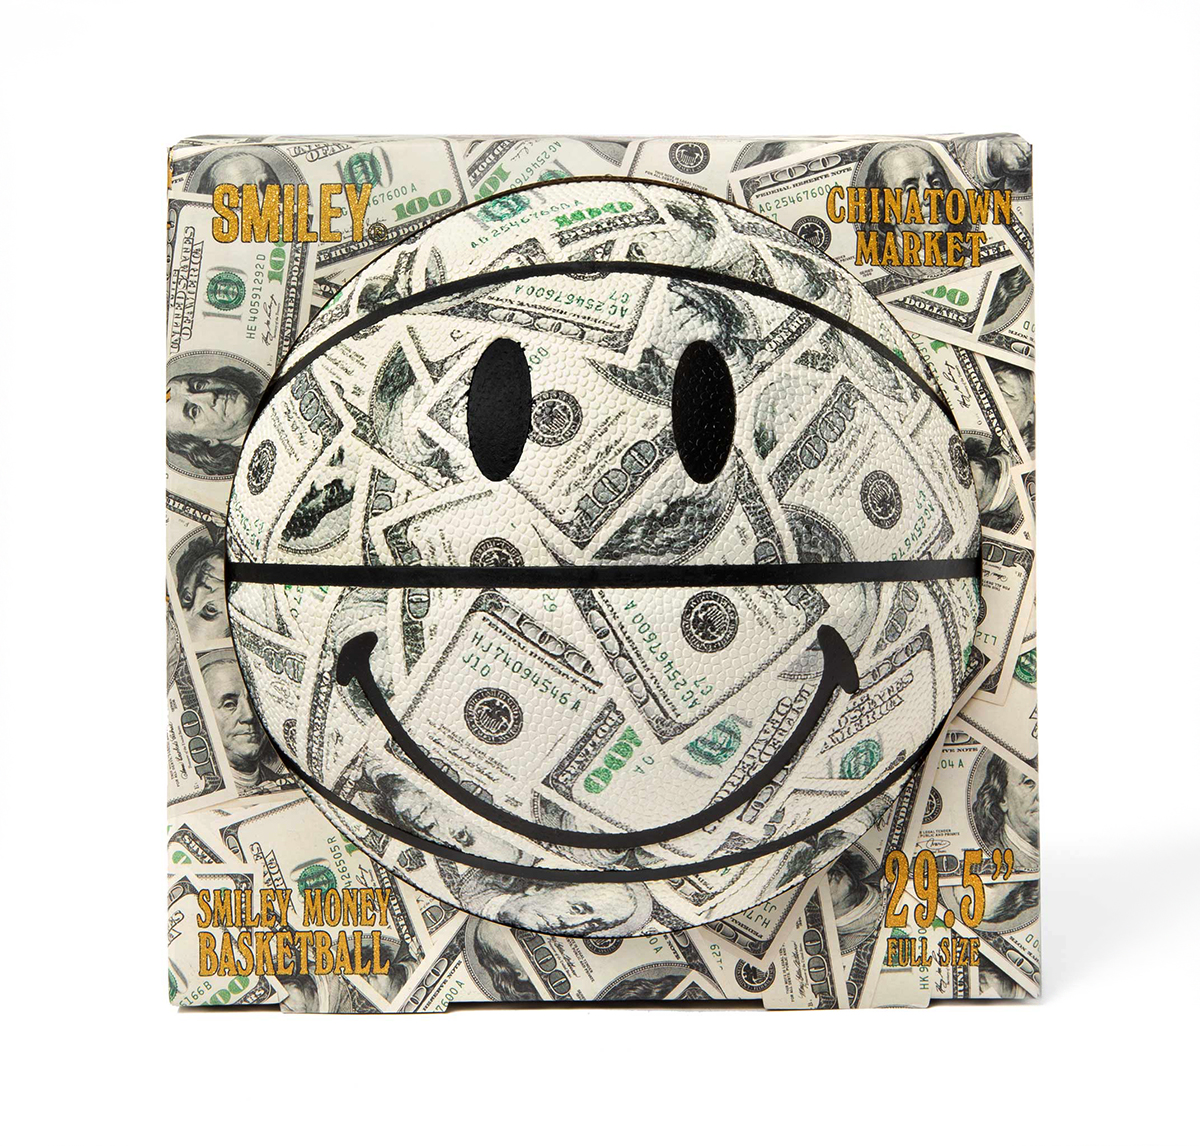 Chinatown Market Smiley Money Basketball - Size 7 packaging